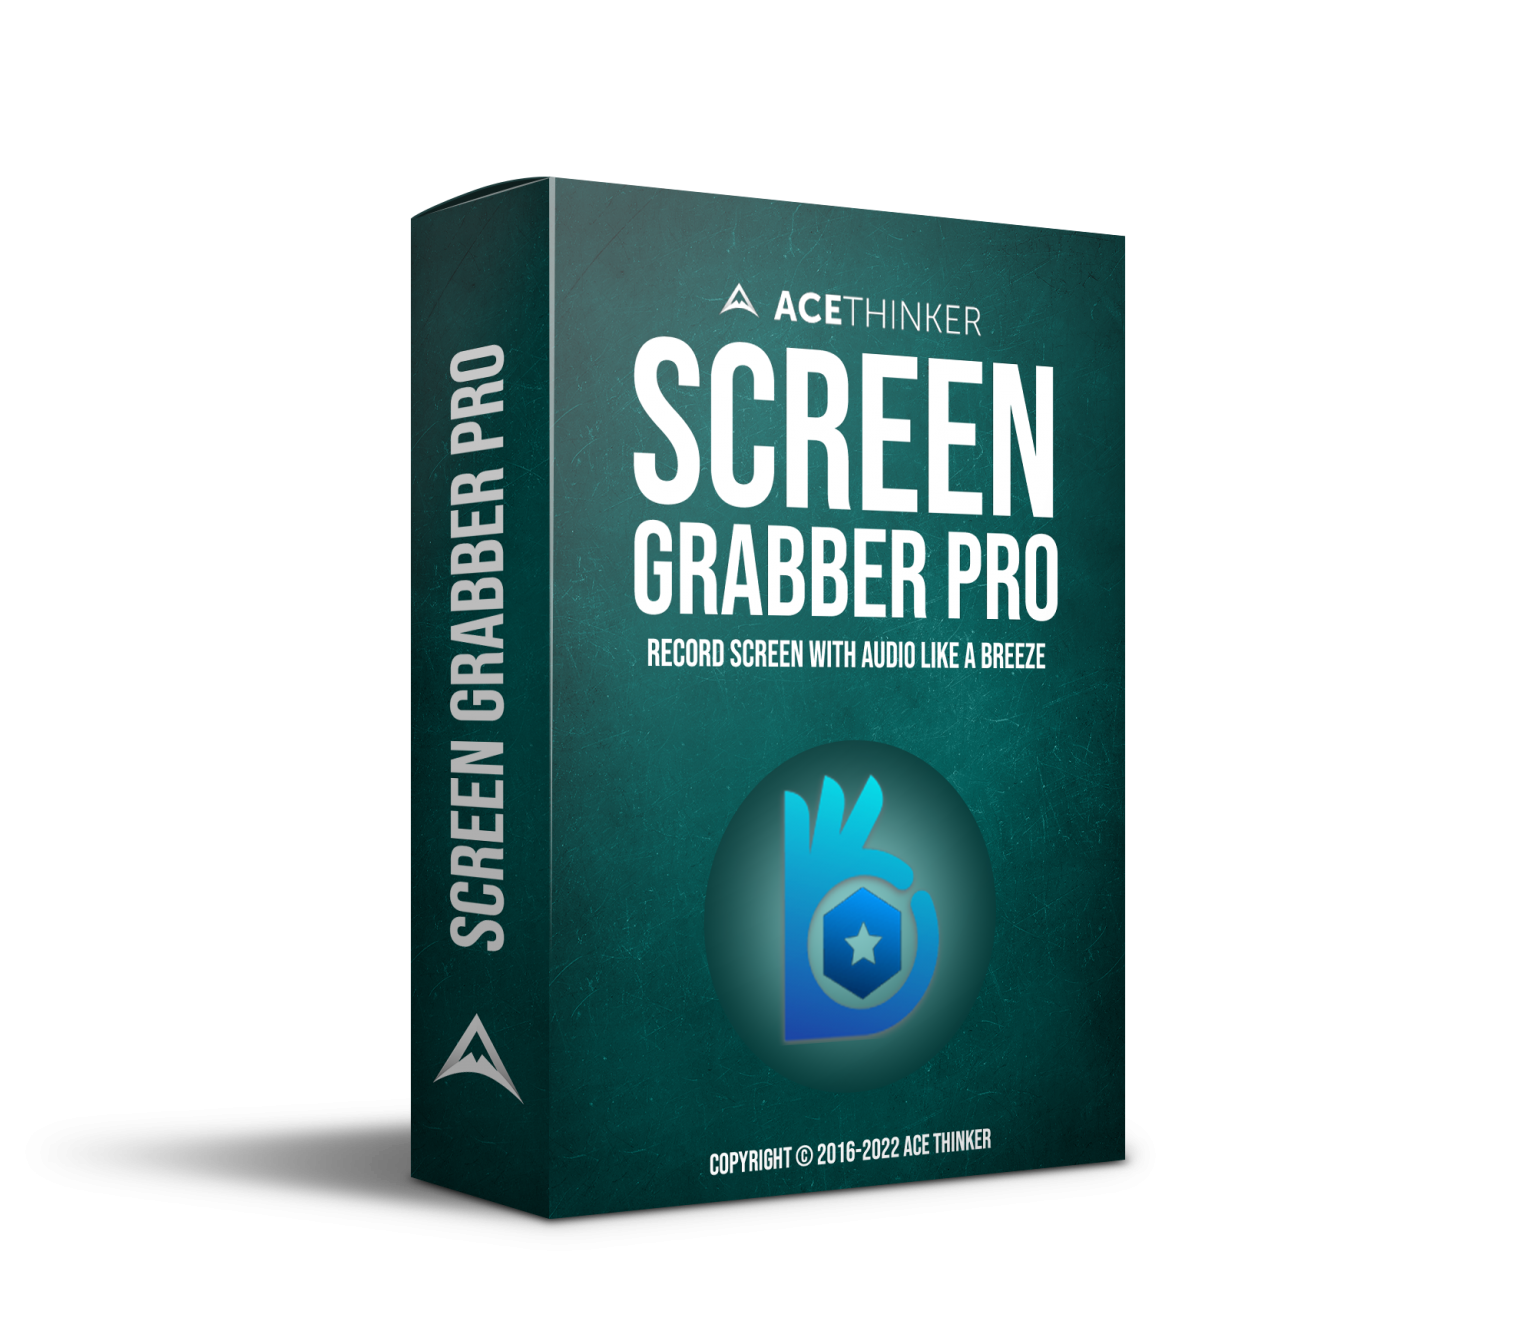 Auslogics Video Grabber Pro 1.0.0.4 download the new for mac